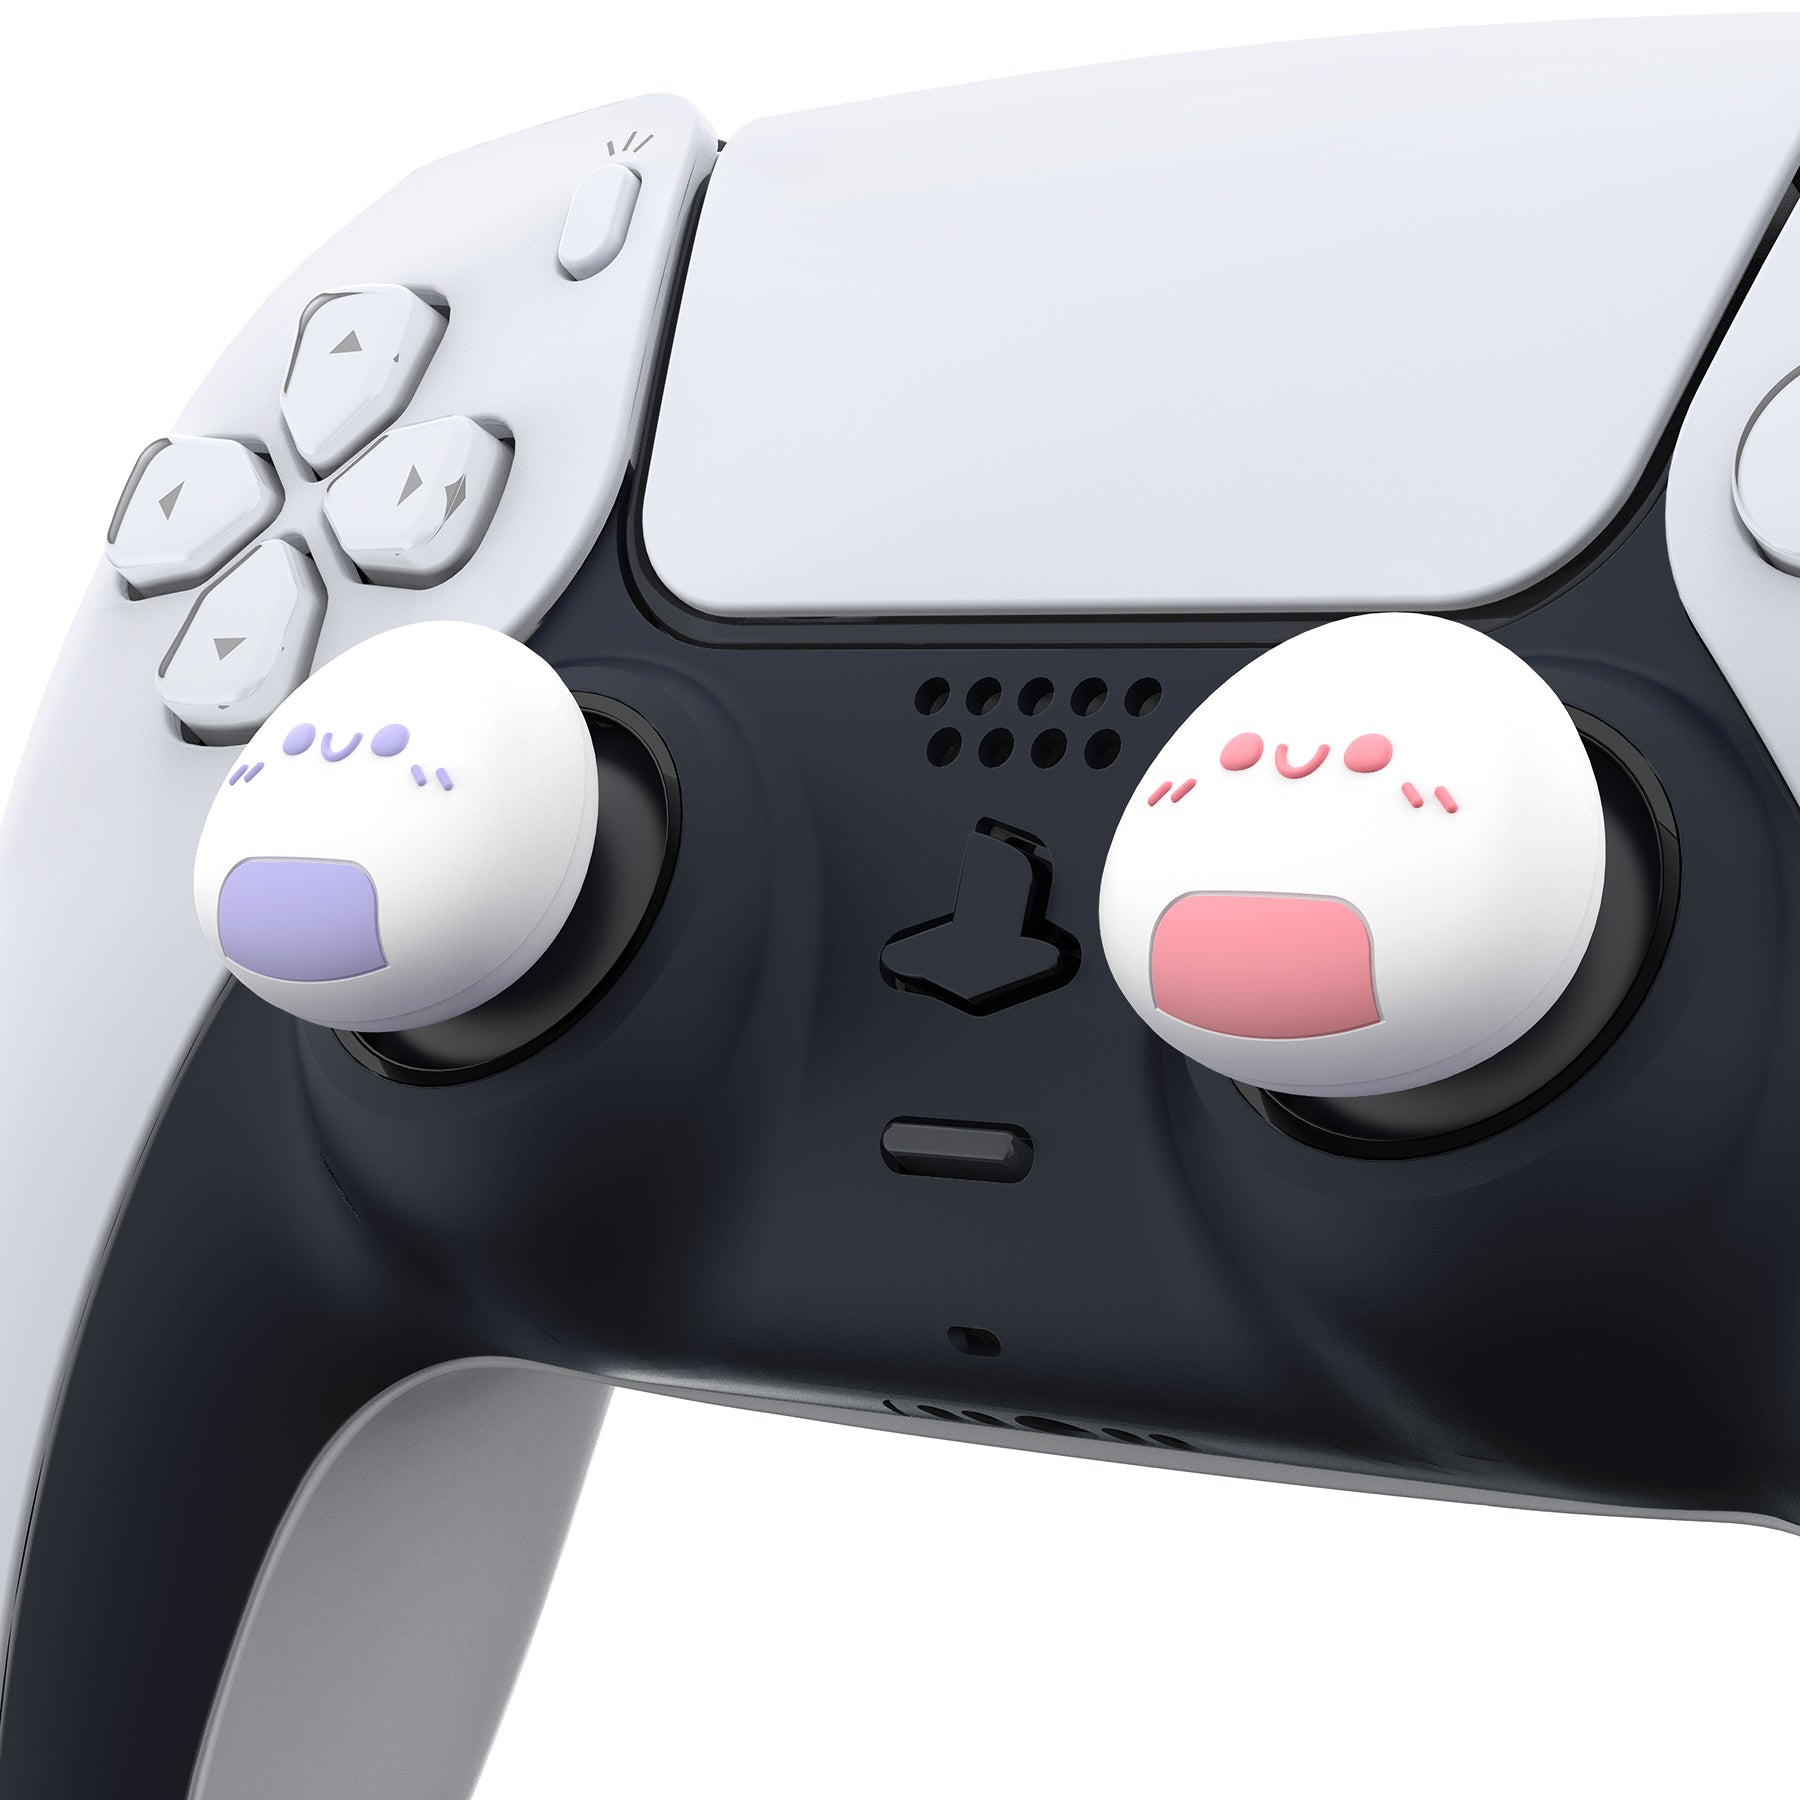 PlayVital Onigiri Cute Thumb Grip Caps for PS5/4 Controller, Silicone Analog Stick Caps Cover for Xbox Series X/S, Thumbstick Caps for Switch Pro Controller - Light Violet & Pink - PJM3008 PlayVital